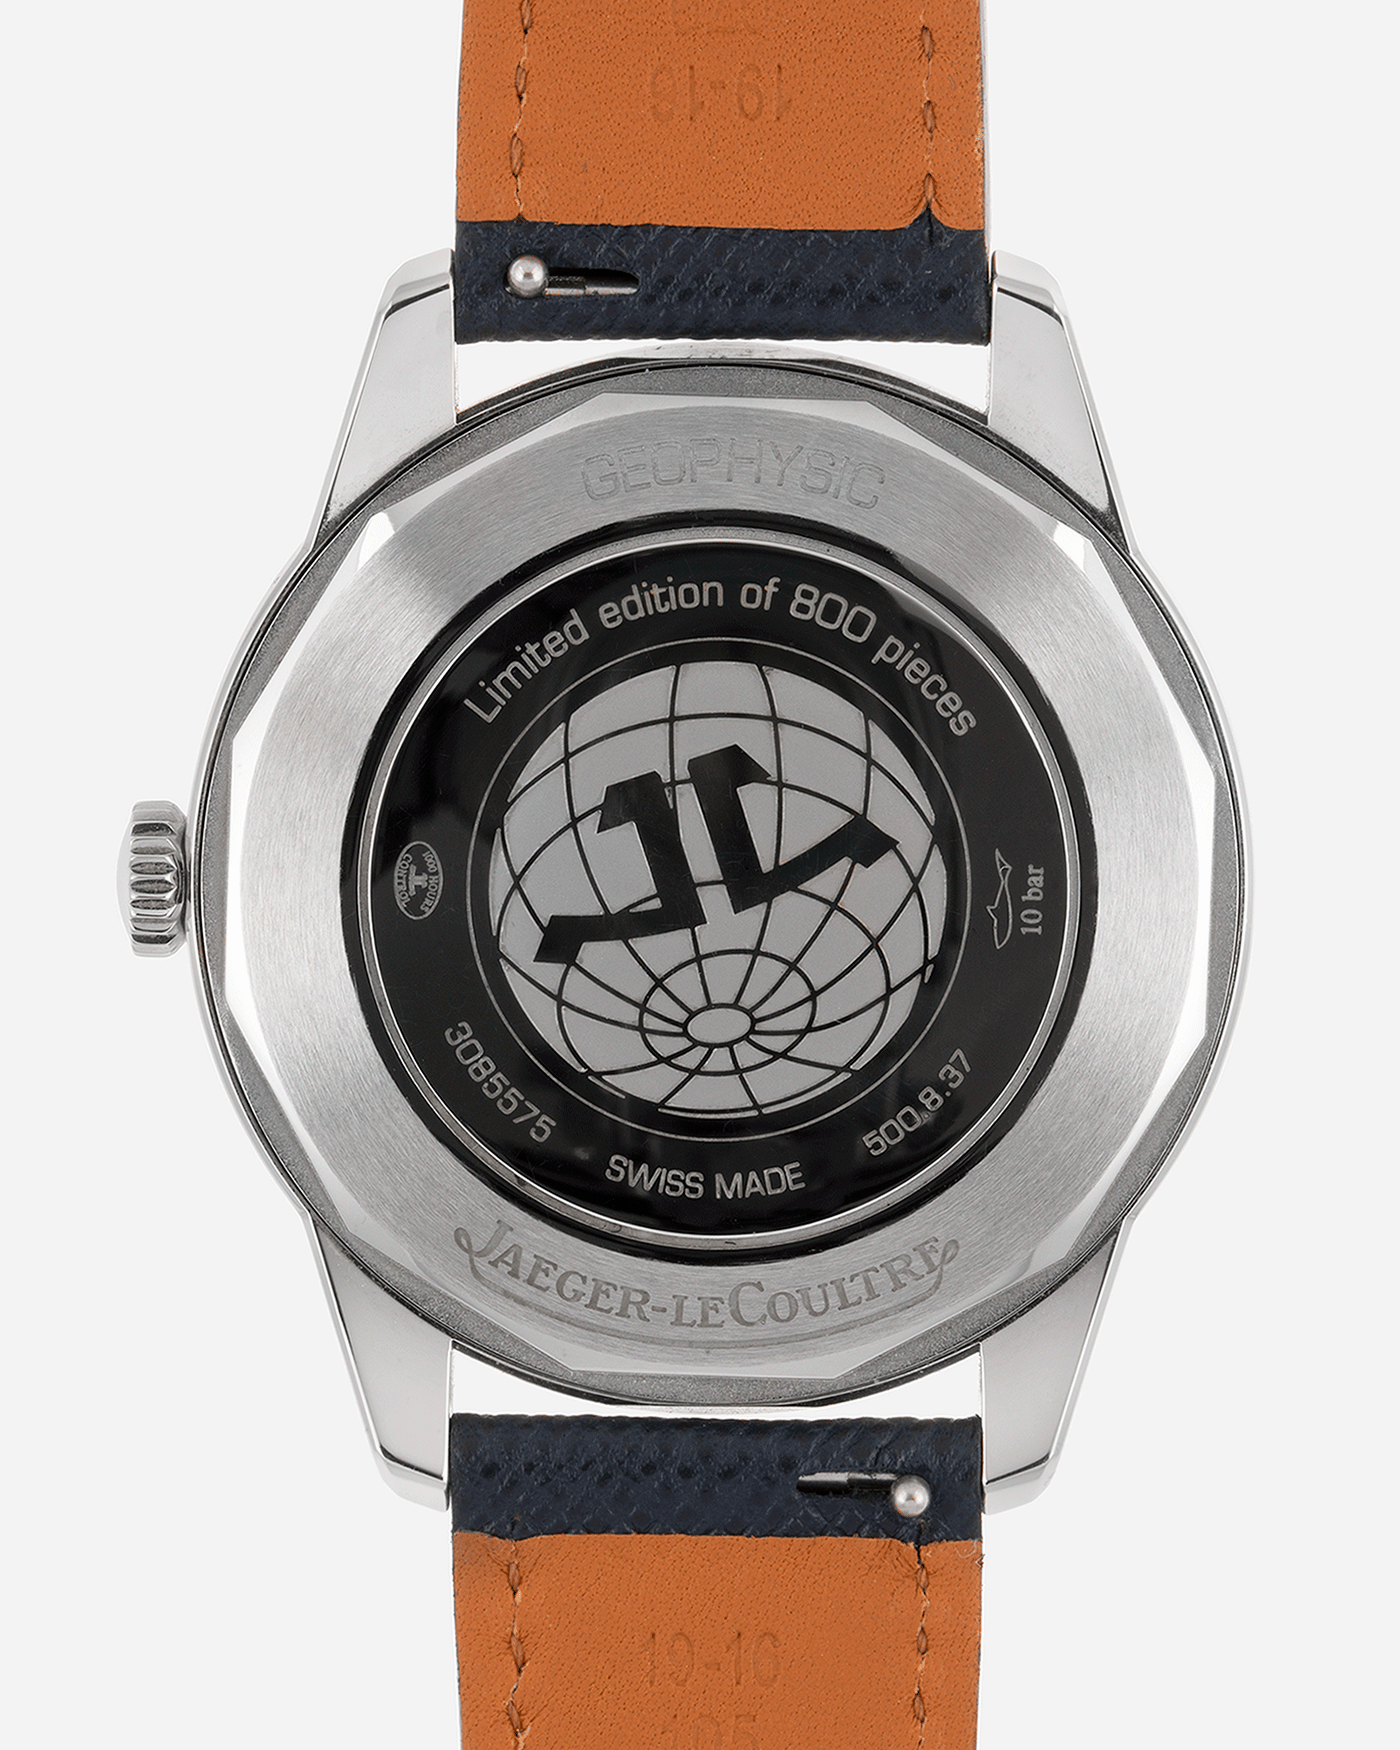 Brand: Jaeger-LeCoultre Year: 2014 Model: Geophysic 1958 Reference Number: Q8008520 Material: Stainless Steel Movement: In-house self winding Cal. 898/1 Case Diameter: 38.5mm Bracelet/Strap: Black Jaeger-LeCoultre Alligator Strap and Stainless Steel Tang Buckle and Molequin X S.Song Navy Calf Strap